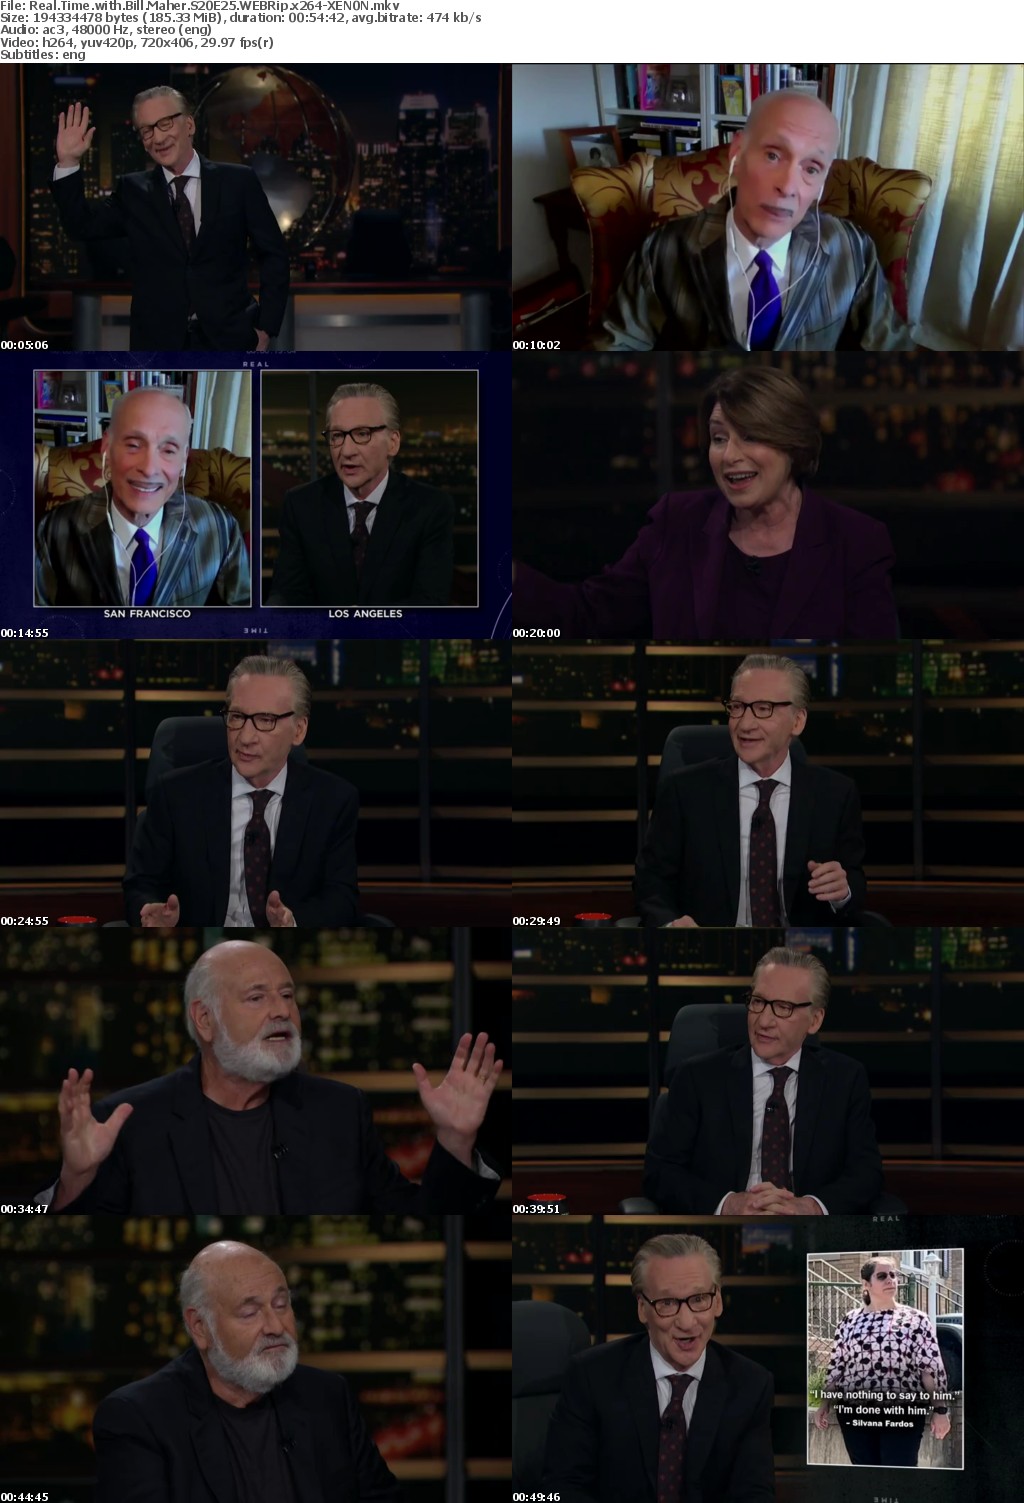 Real Time with Bill Maher S20E25 WEBRip x264-XEN0N